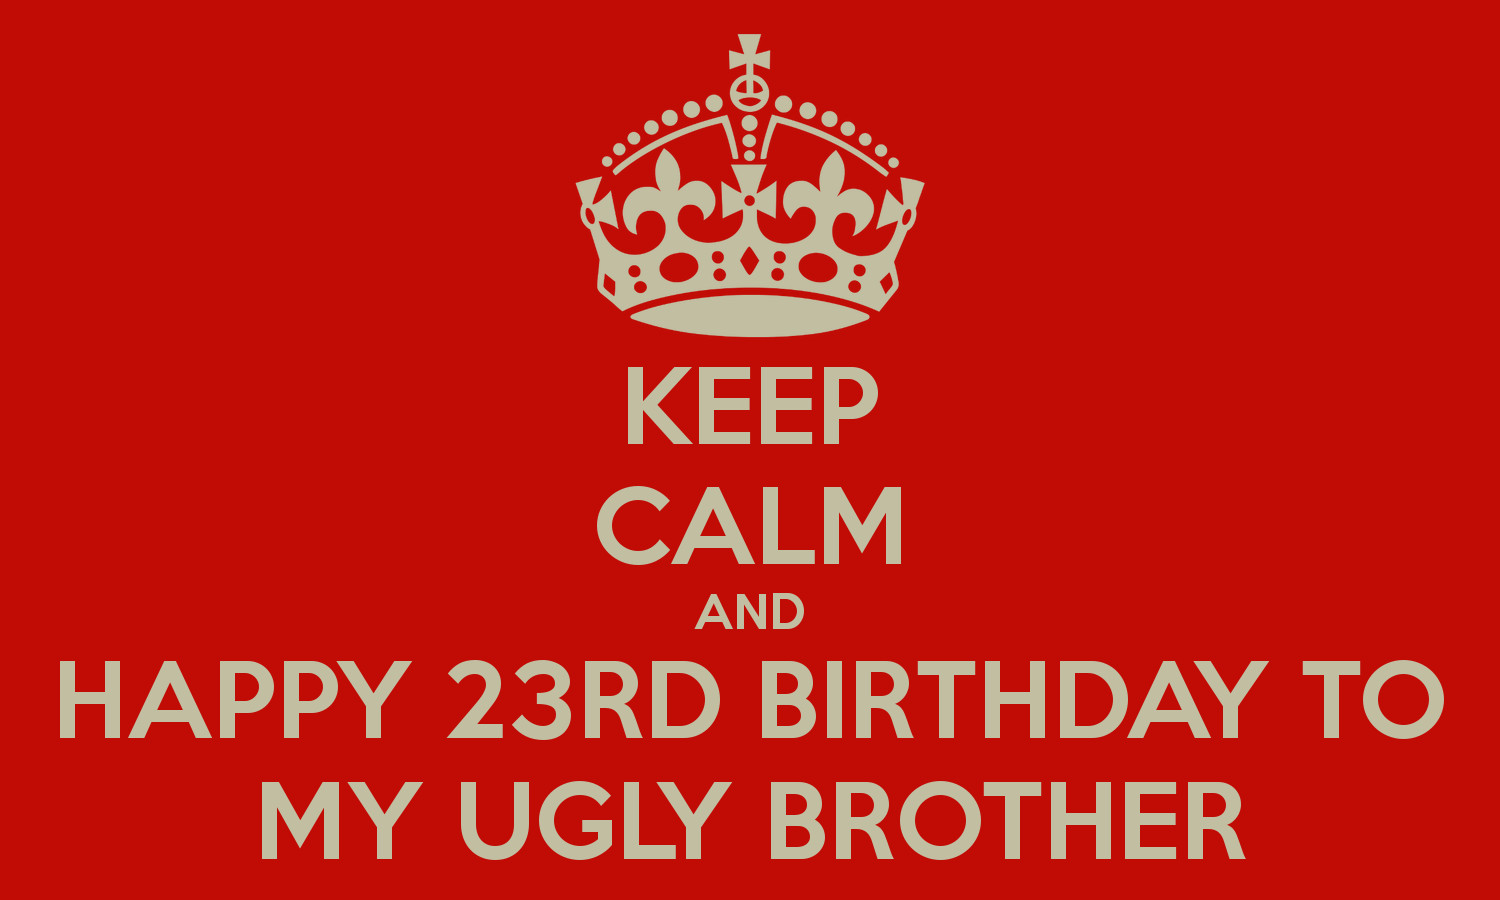 My 23Rd Birthday Quotes
 KEEP CALM AND HAPPY 23RD BIRTHDAY TO MY UGLY BROTHER